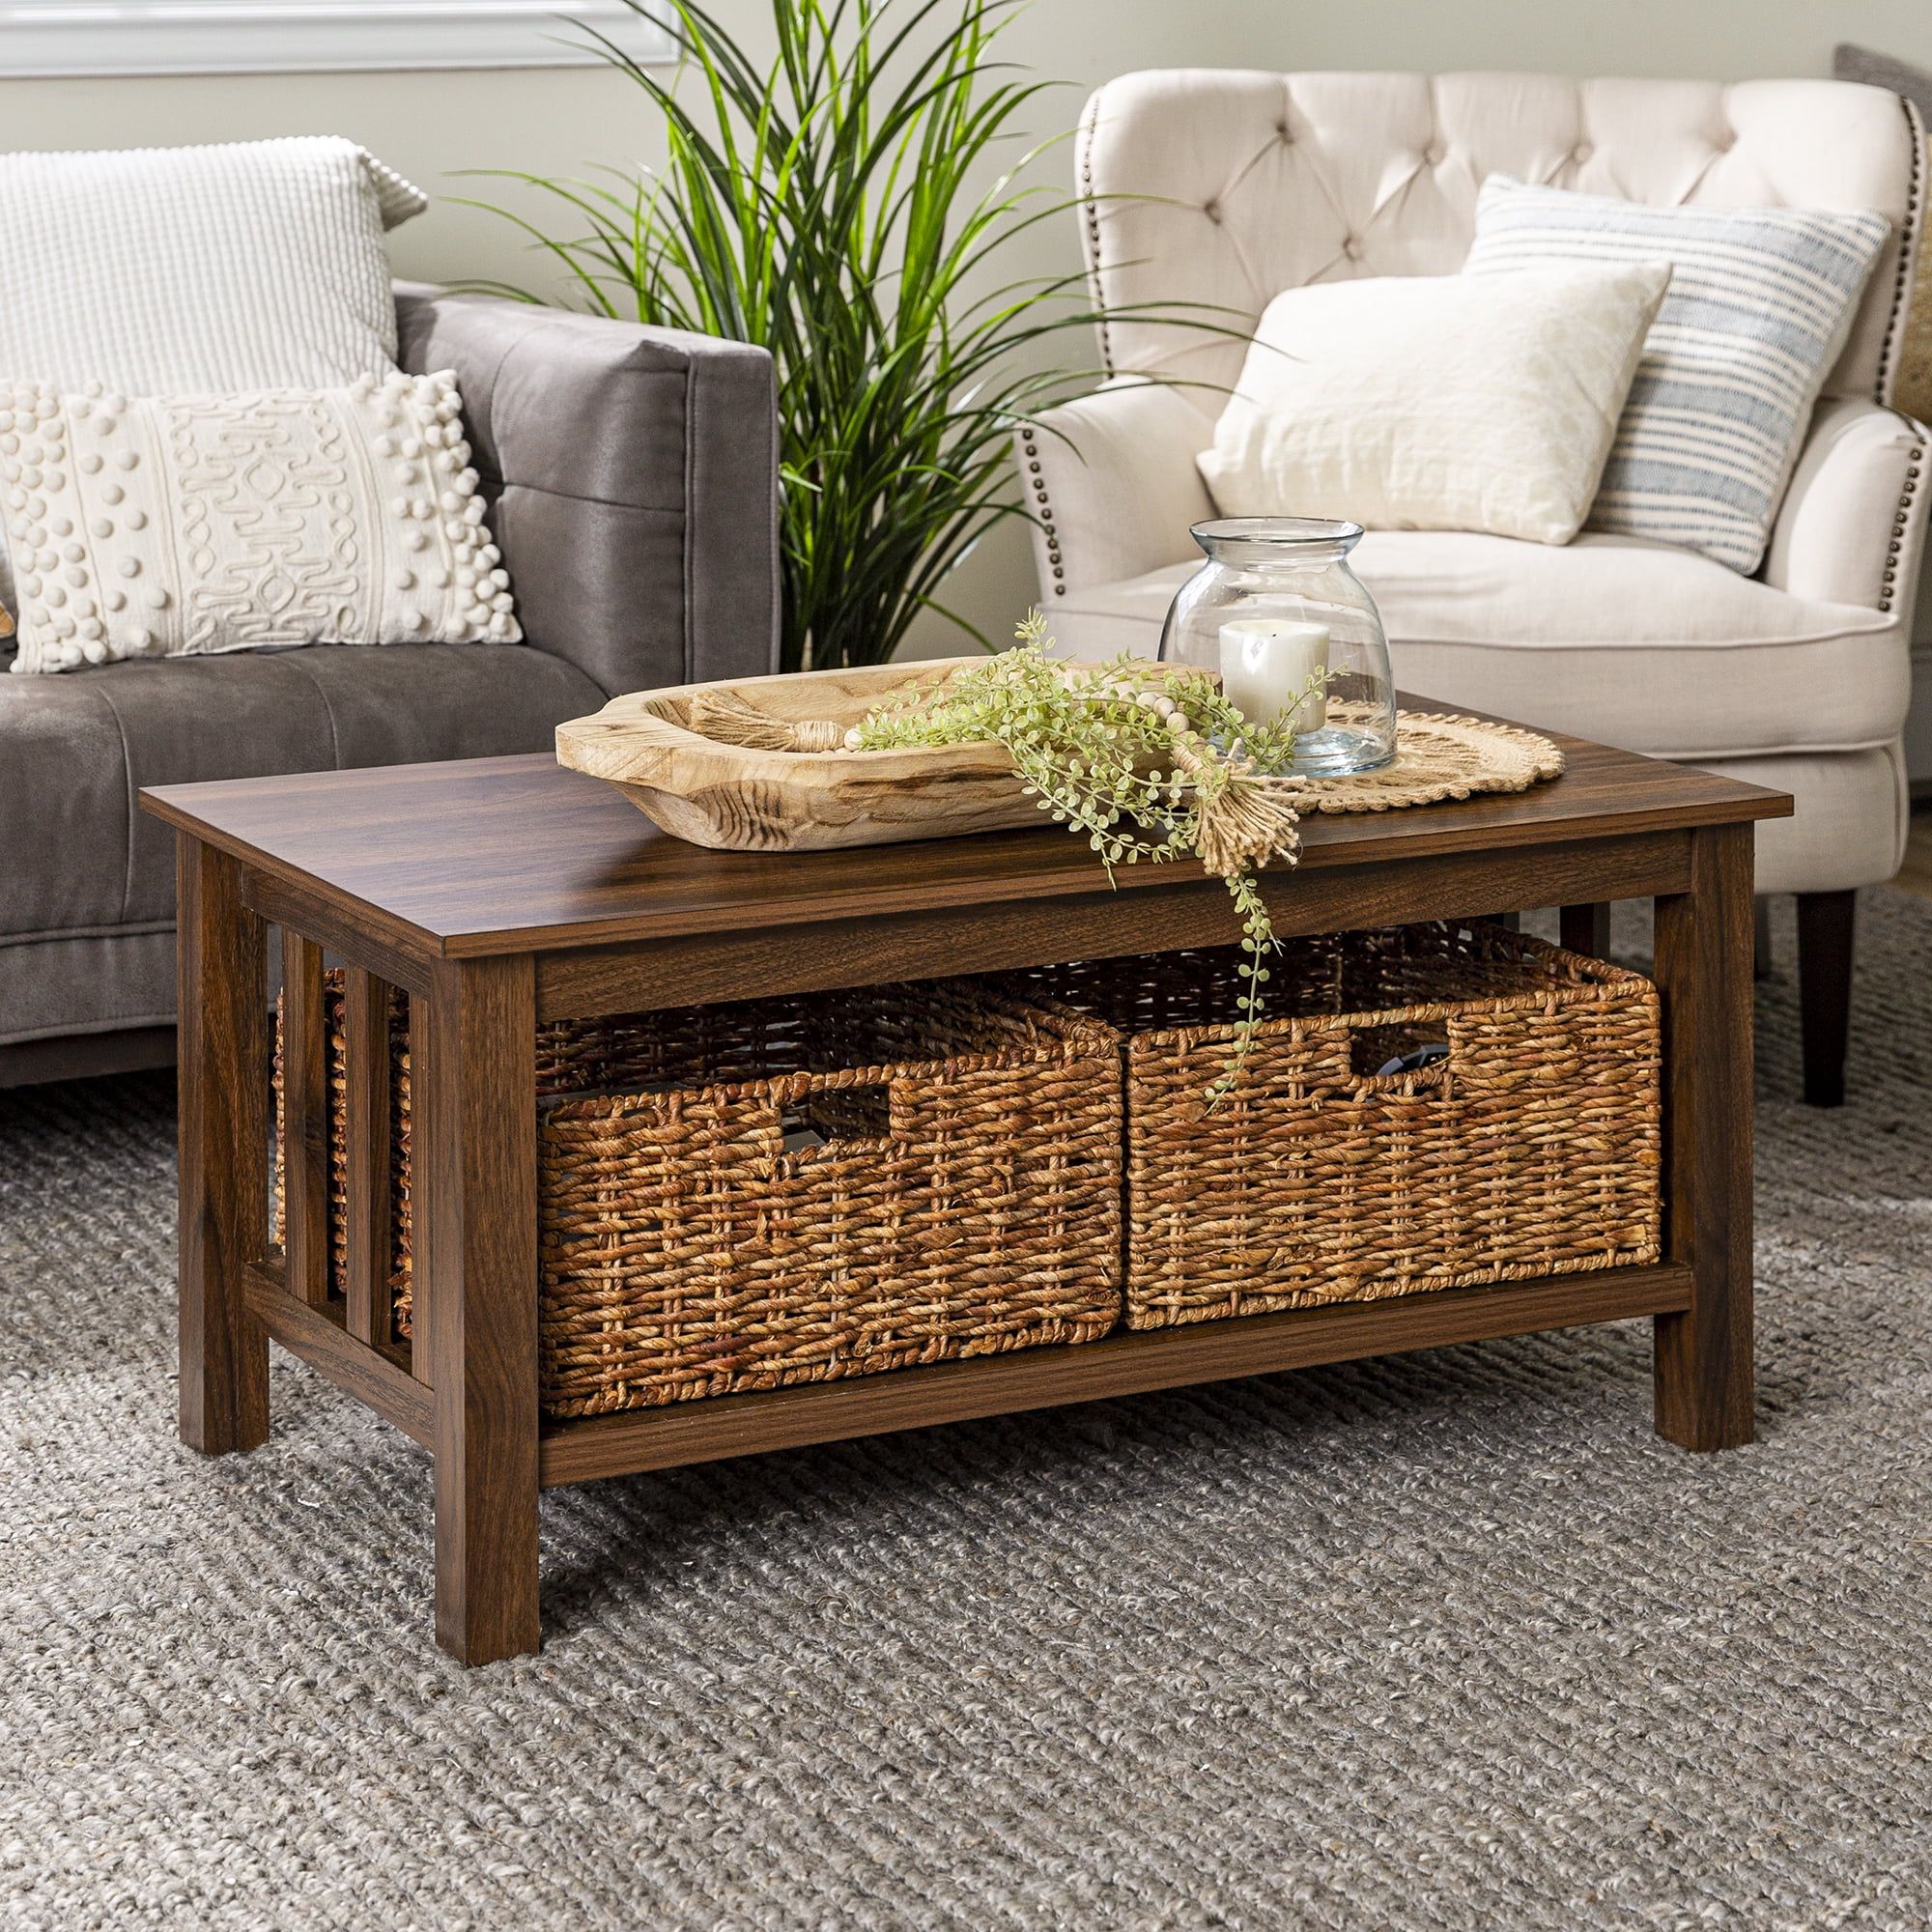 Woven Paths Traditional Storage Coffee Table With Bins, Dark Walnut Inside Coffee Tables With Storage (View 10 of 15)